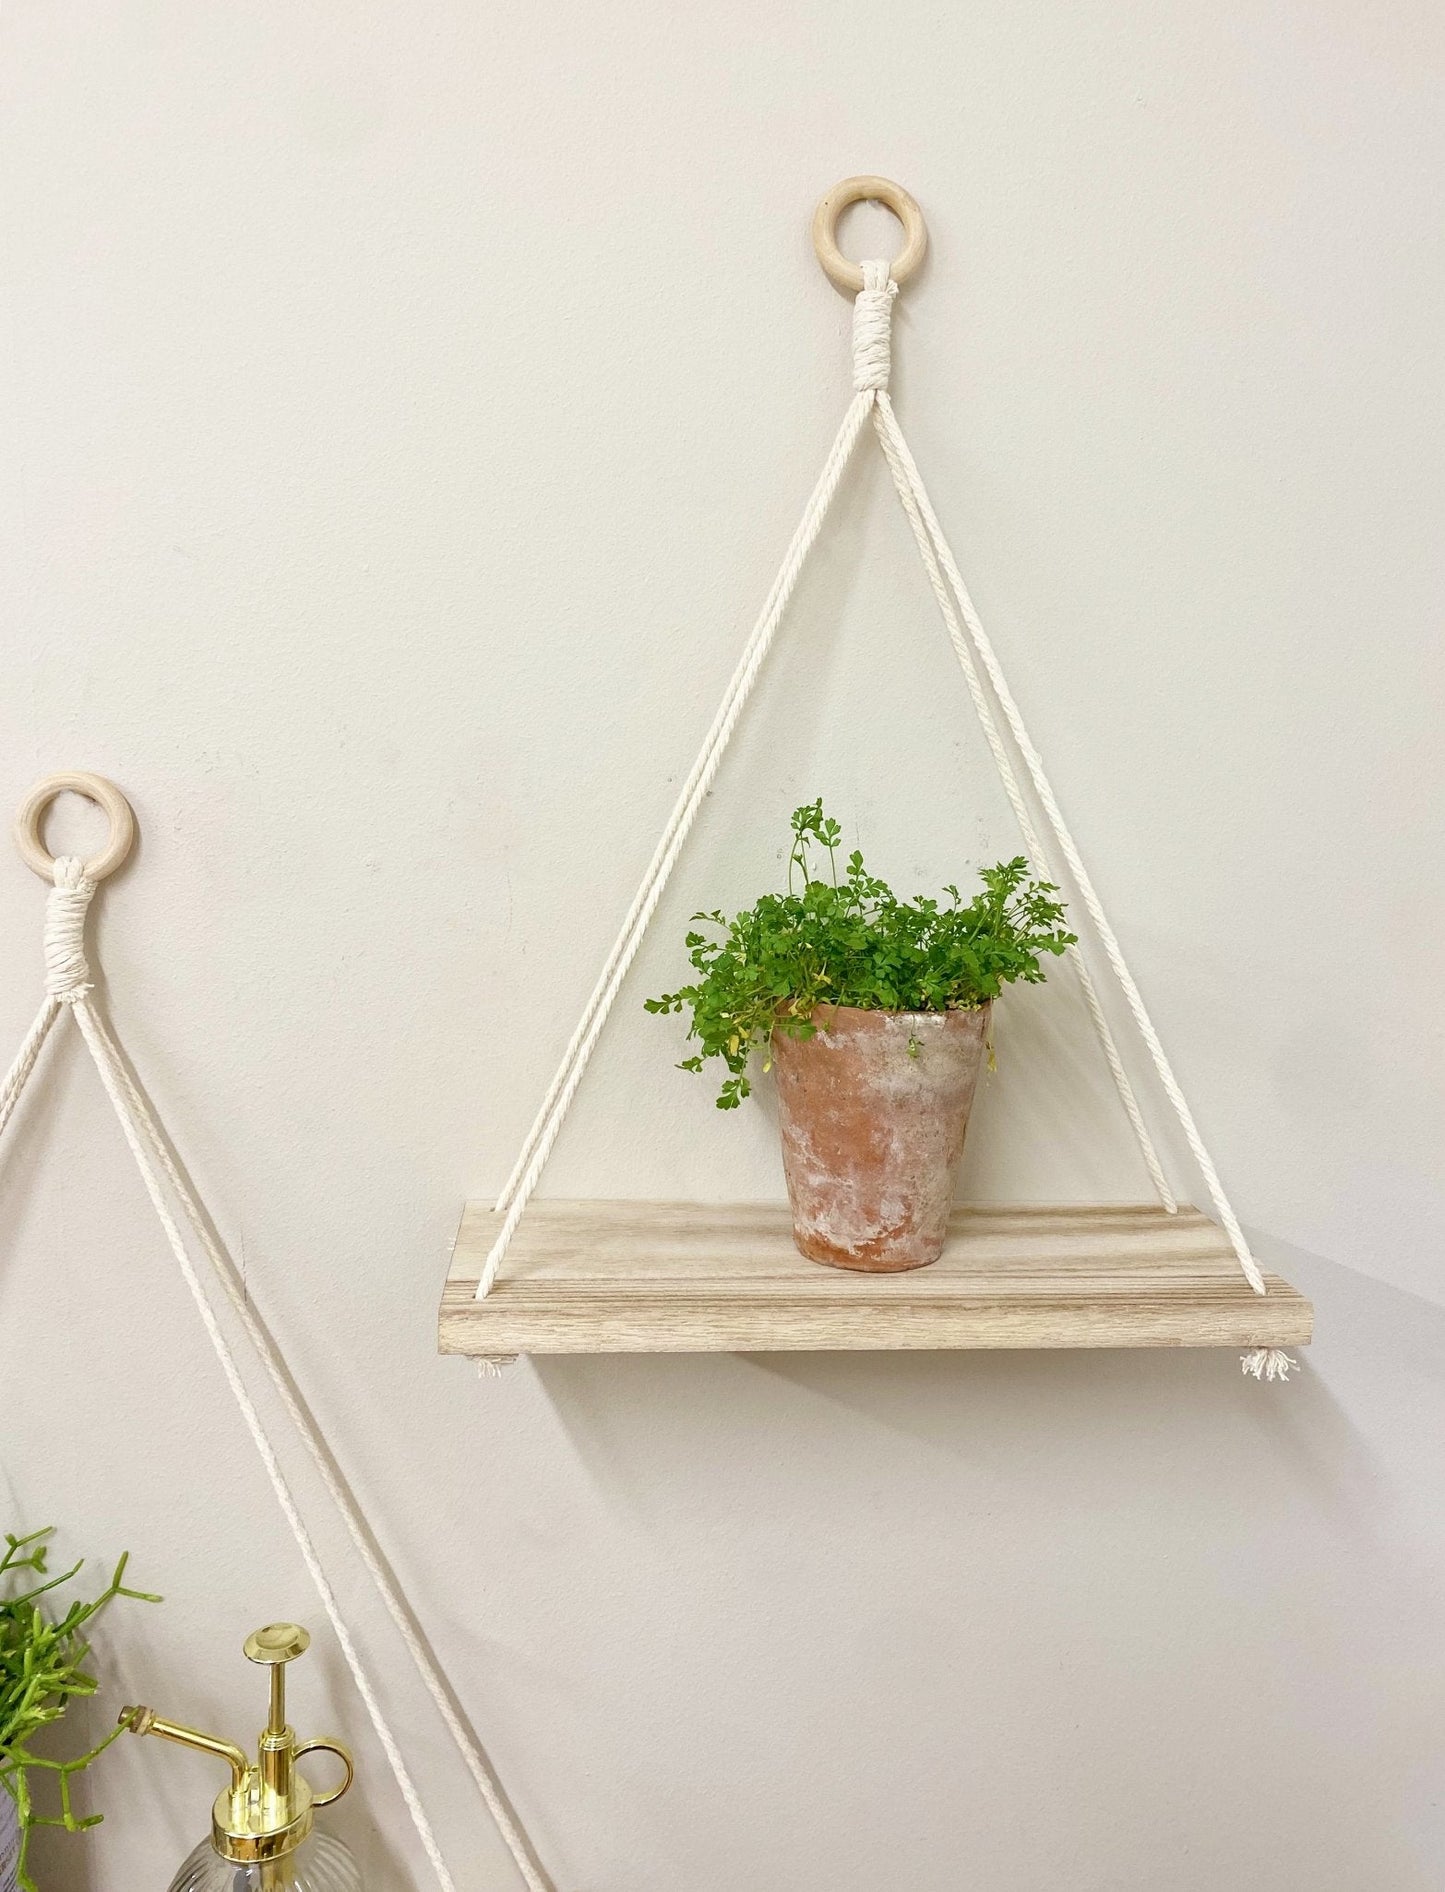 Set of Two Hanging Wall Shelves  from Eleanoras